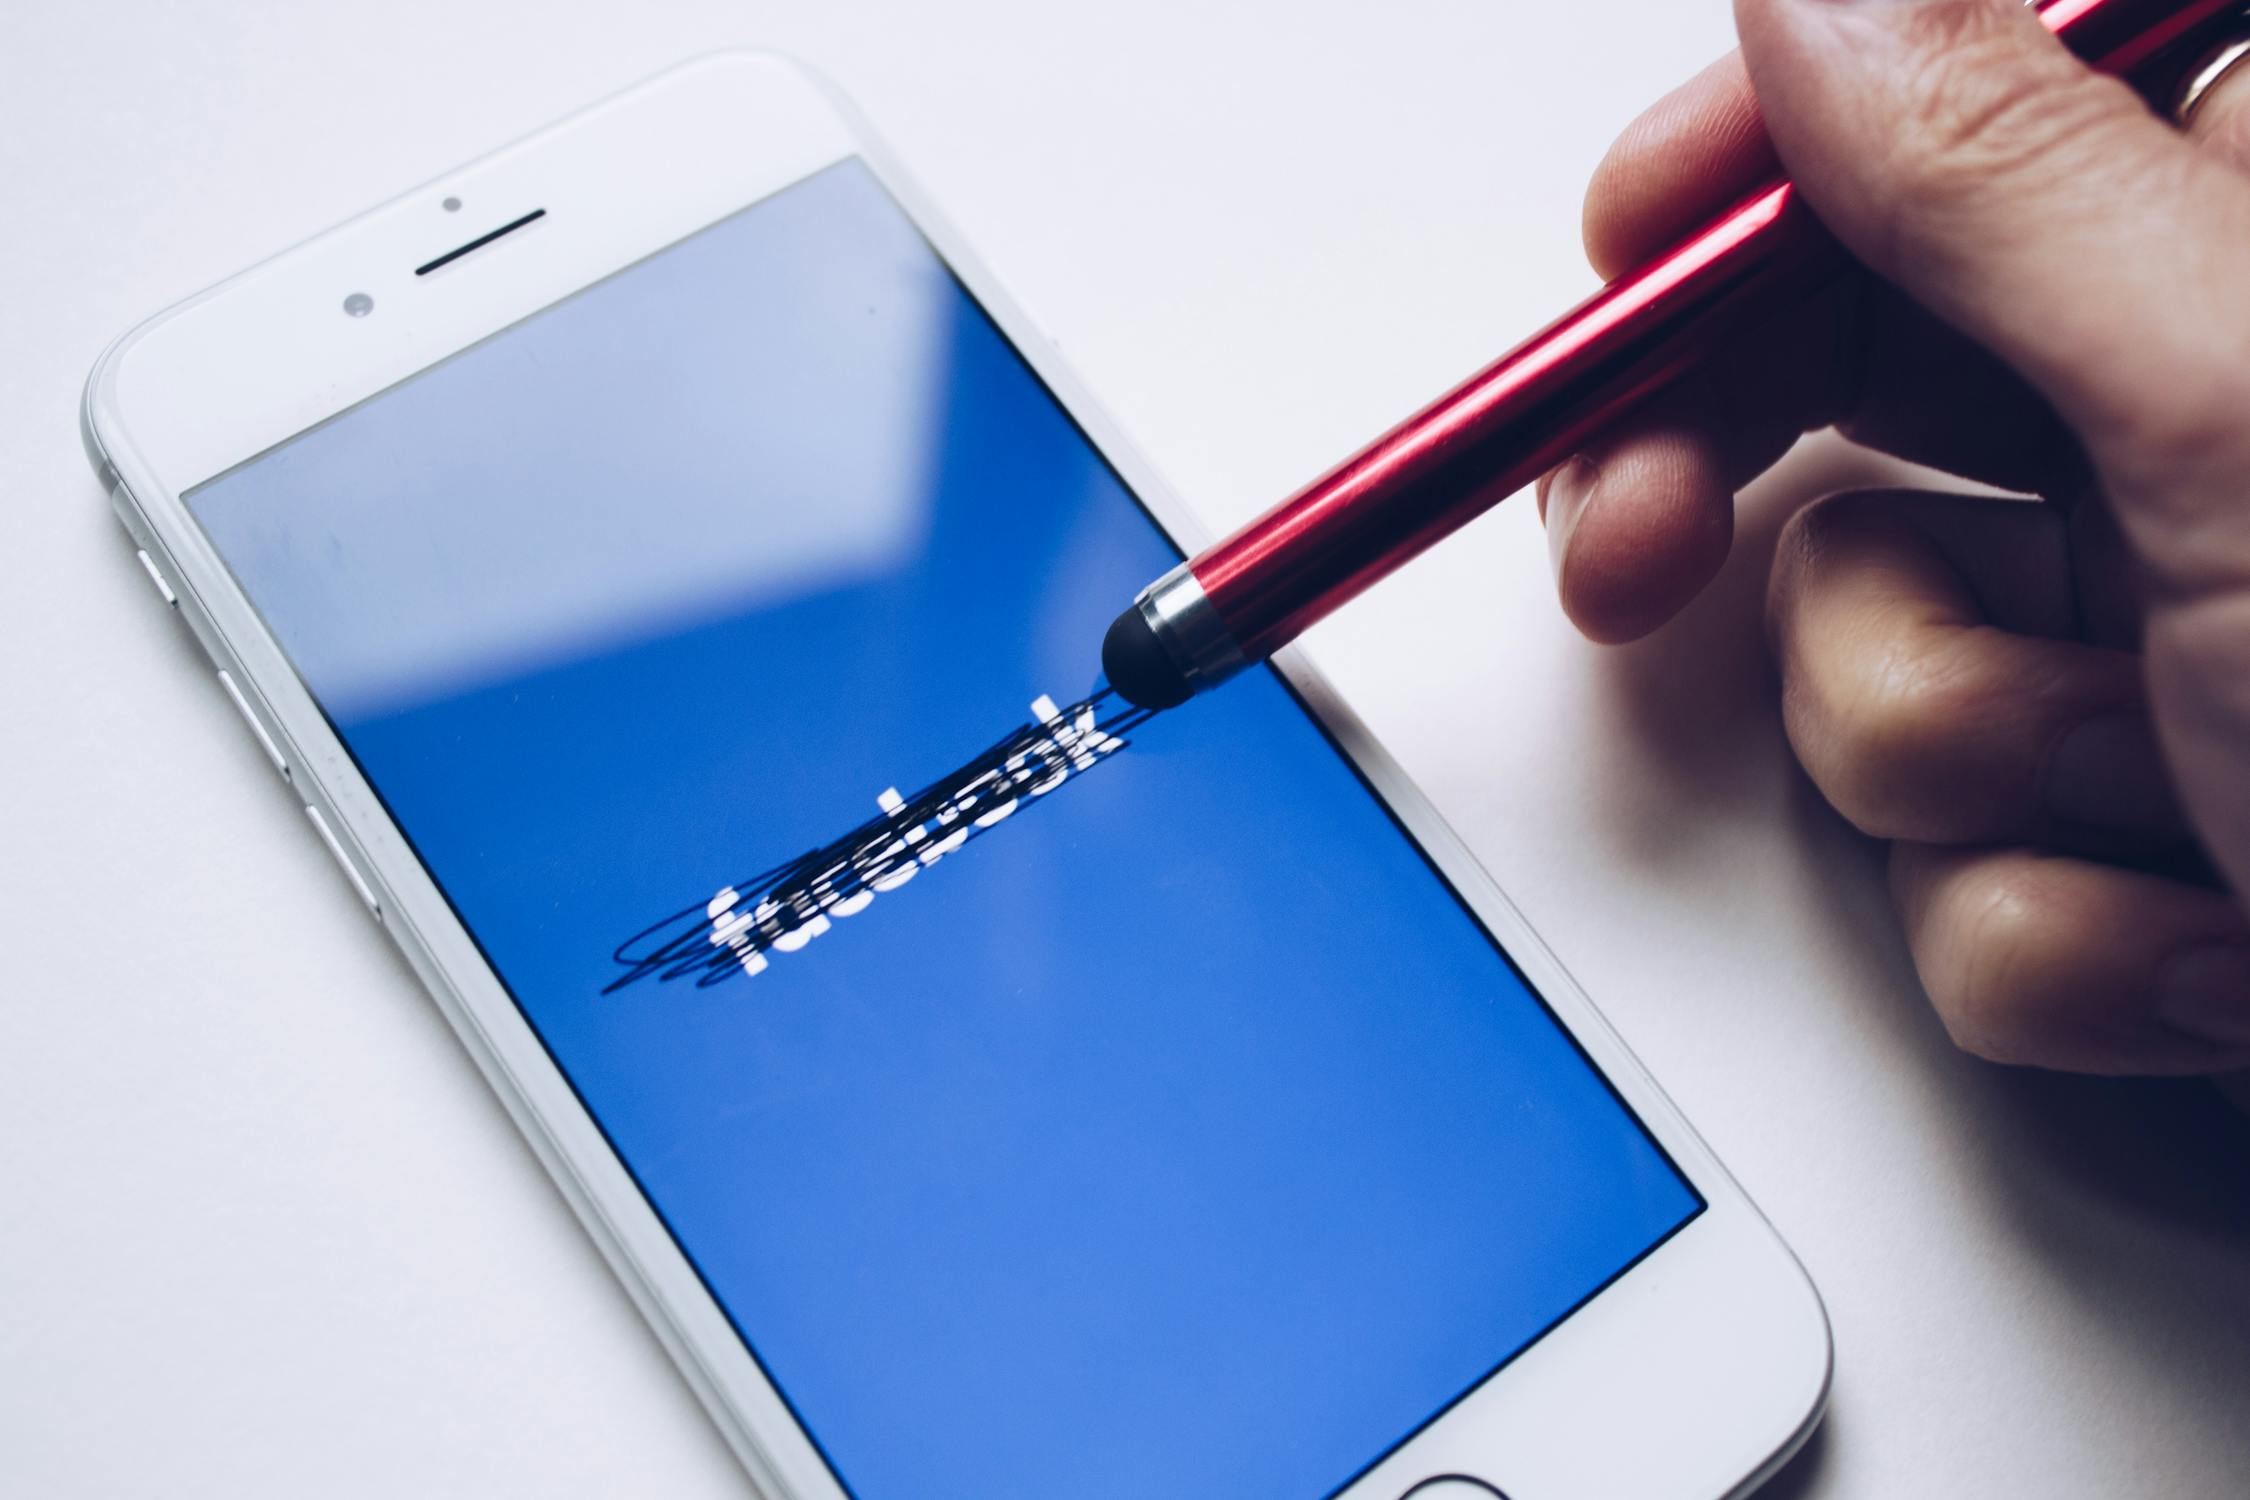 Facebook Photo by Thought Catalog from Pexels